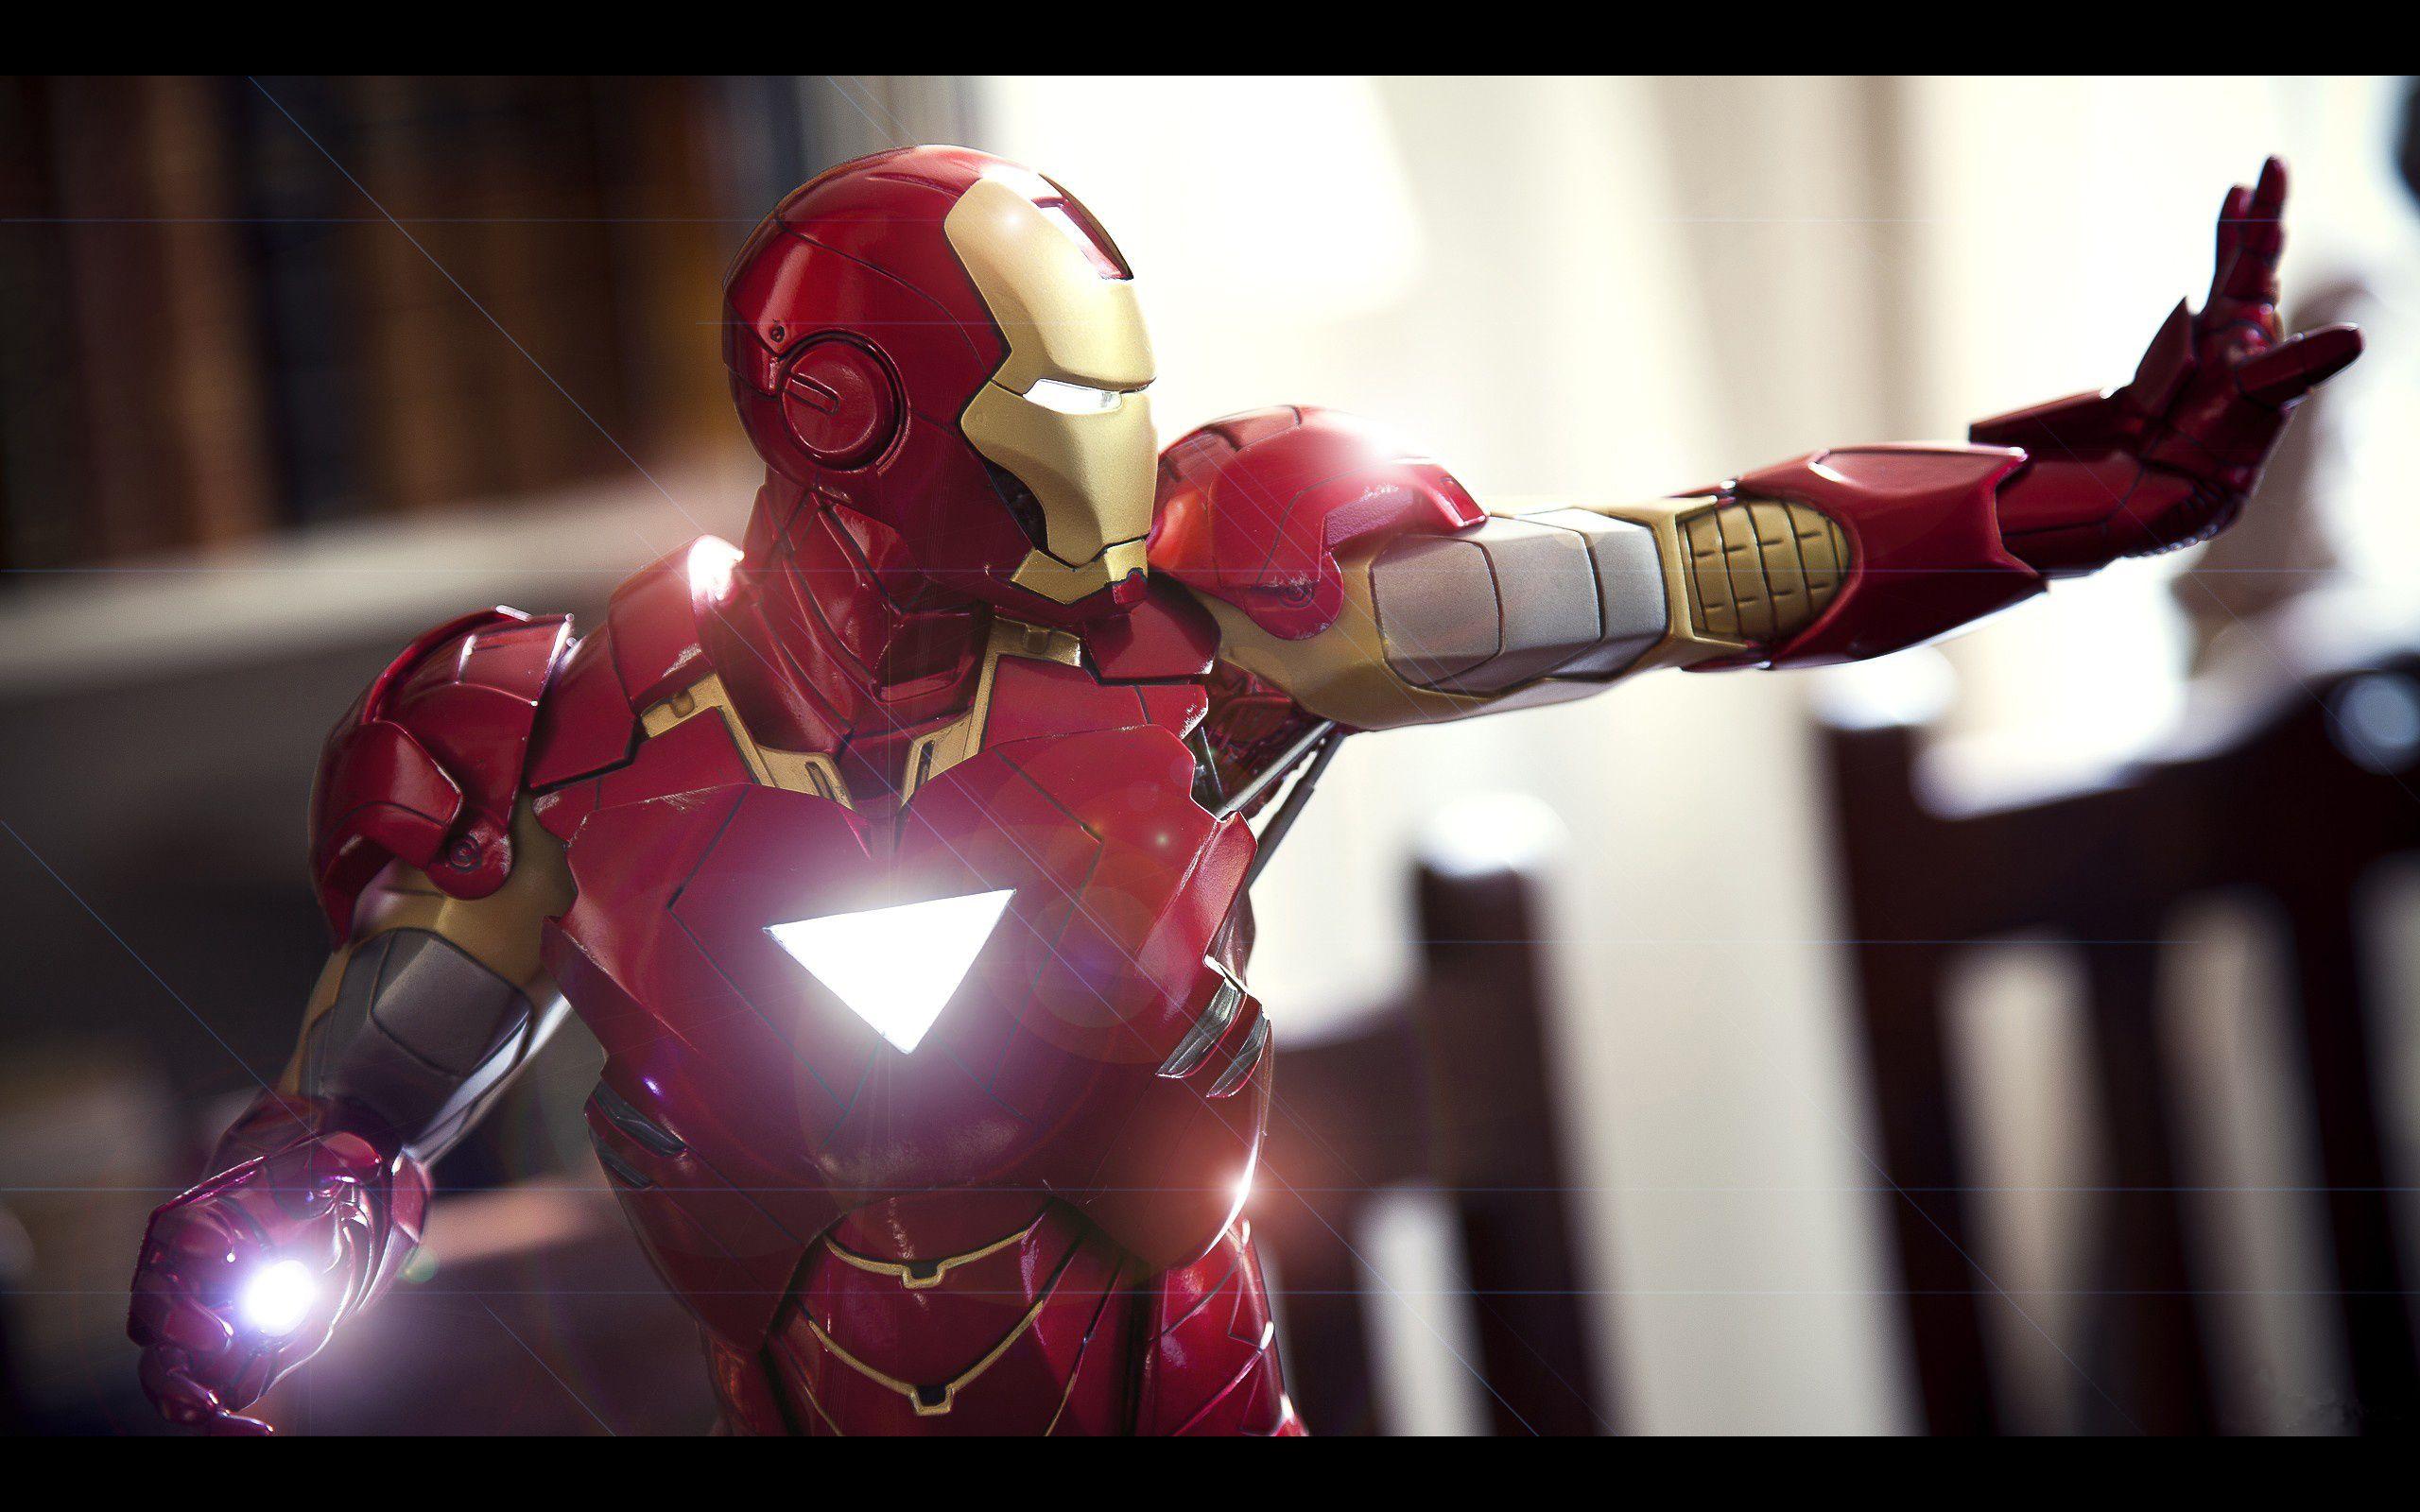 Iron Man Suit in Close Up for Wallpaper. HD Wallpaper. Wallpaper